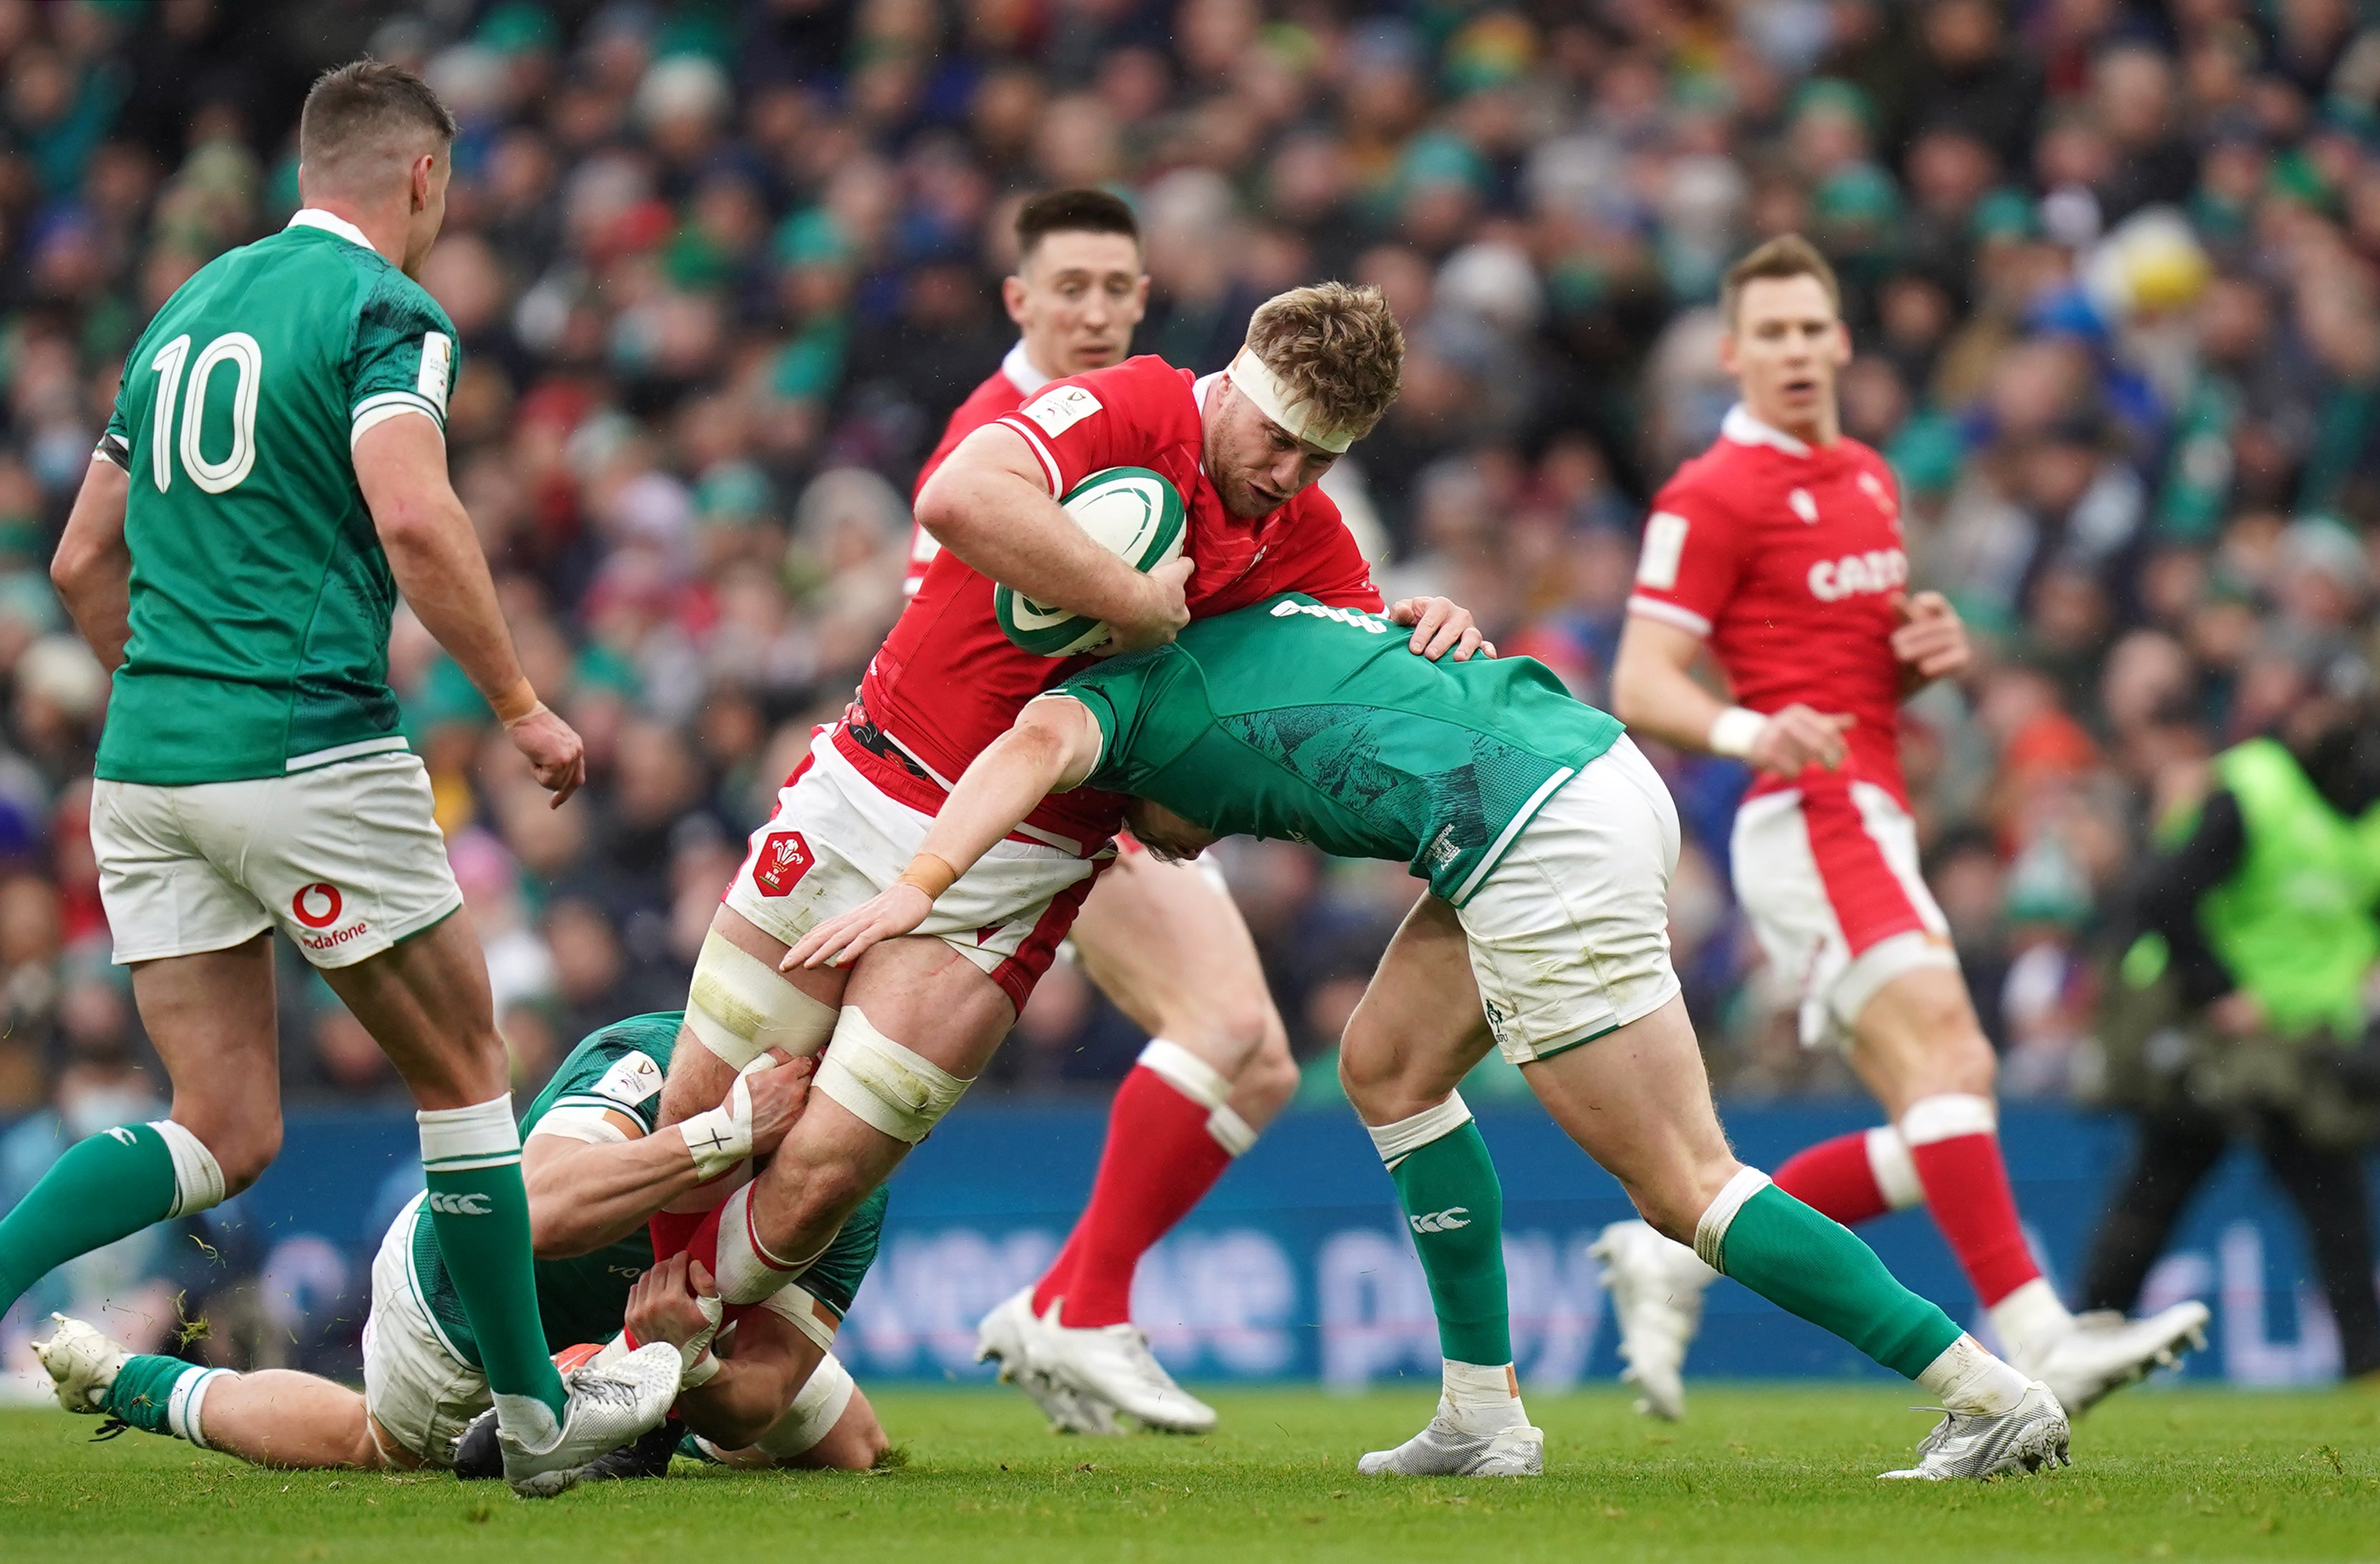 Wales’ coaches are looking for more physicality than was shown in the 29-7 defeat against Ireland (Niall Carson/PA Images).